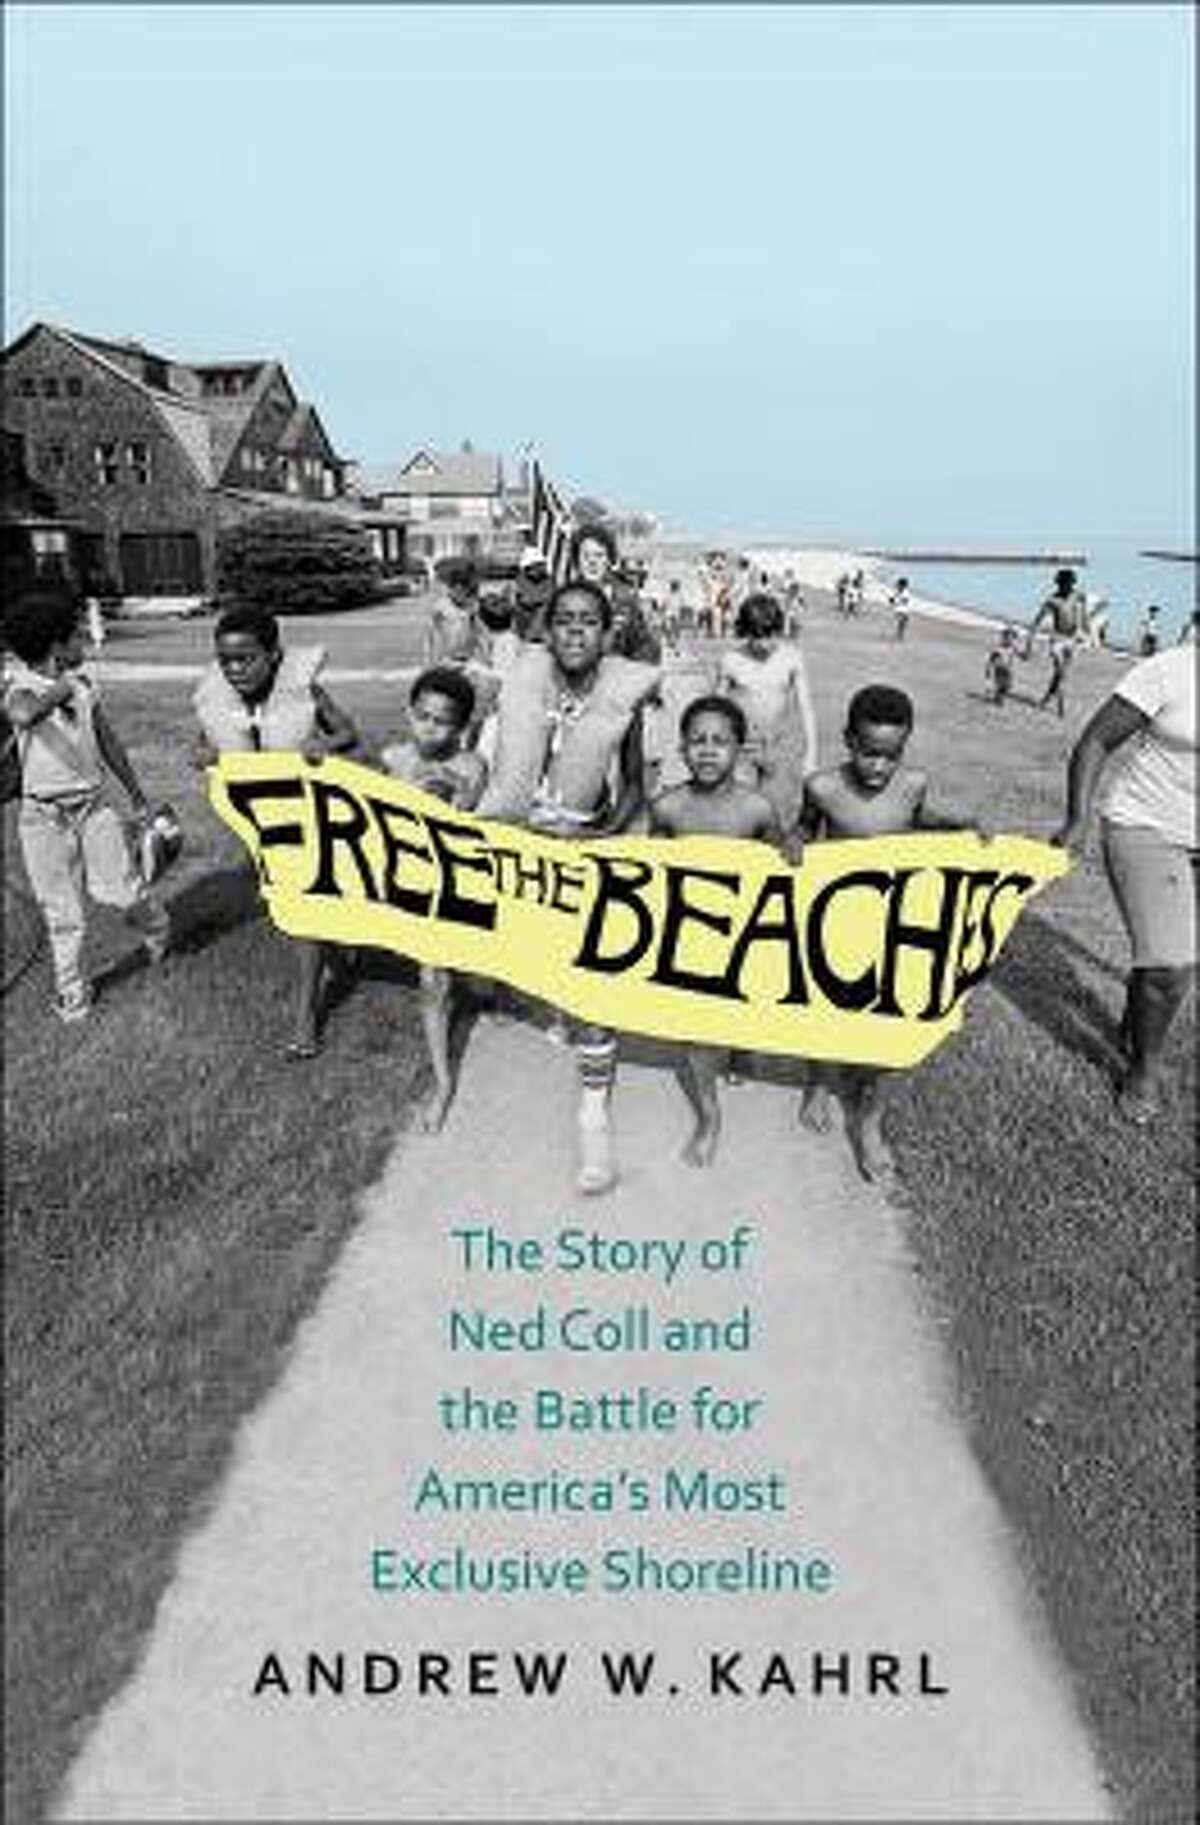 The Wilton Historical Society is going to host a talk via Zoom with the author of the book that is titled: “Free the Beaches: The Story of Ned Coll and the Battle for America’s Most Exclusive Shoreline,” Andrew W. Kahrl, in a Black History Month Presentation, on Thursday, Feb. 24, from 12:30 to 1:30 p.m. A photo of the book cover for the book, is shown.